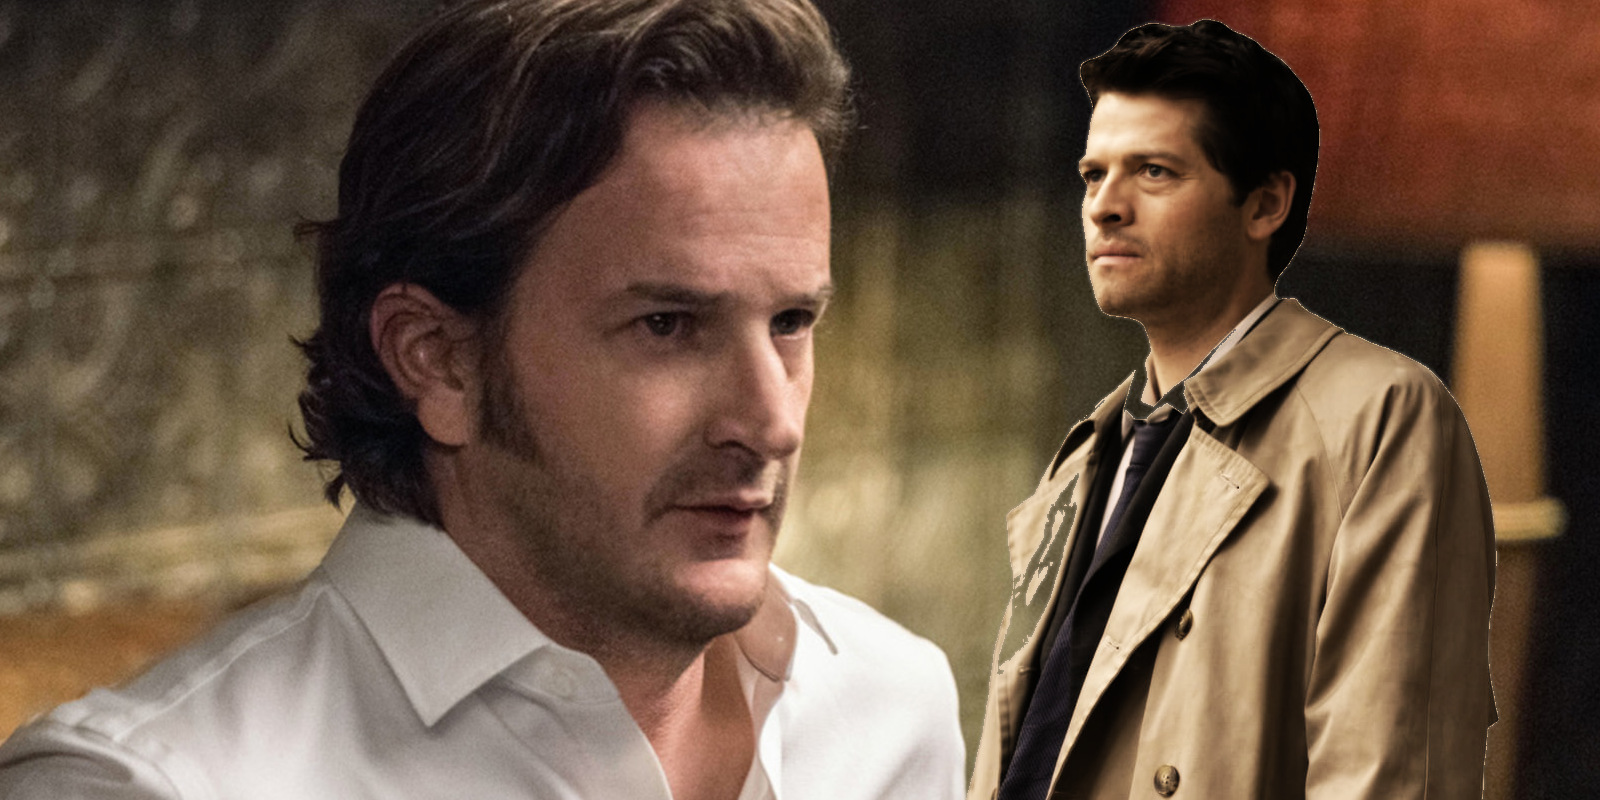 Supernatural: 10 Biggest Plot Twists (That No One Saw Coming)